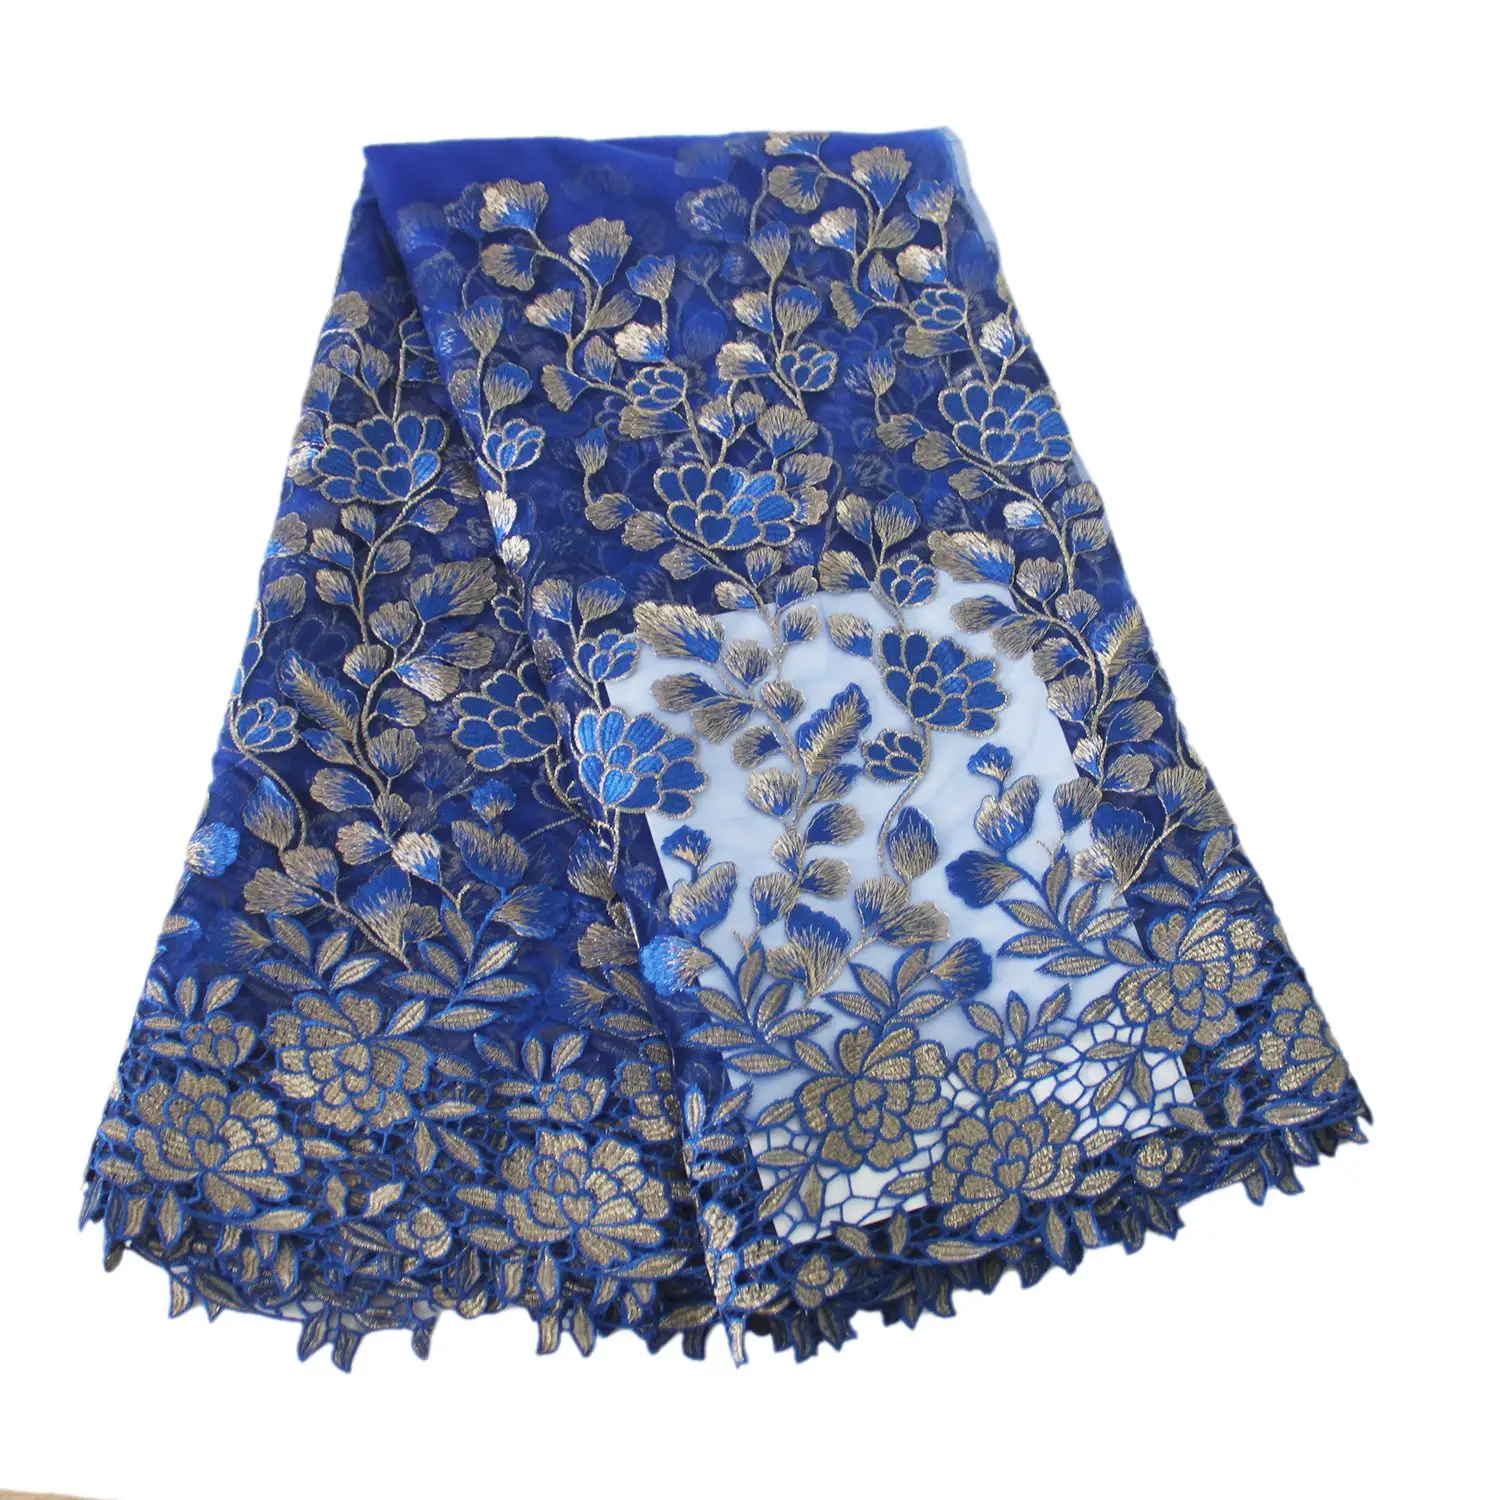 Wholesale trended 3D embroidered flower blue tulle embroidery lace fabric for dress